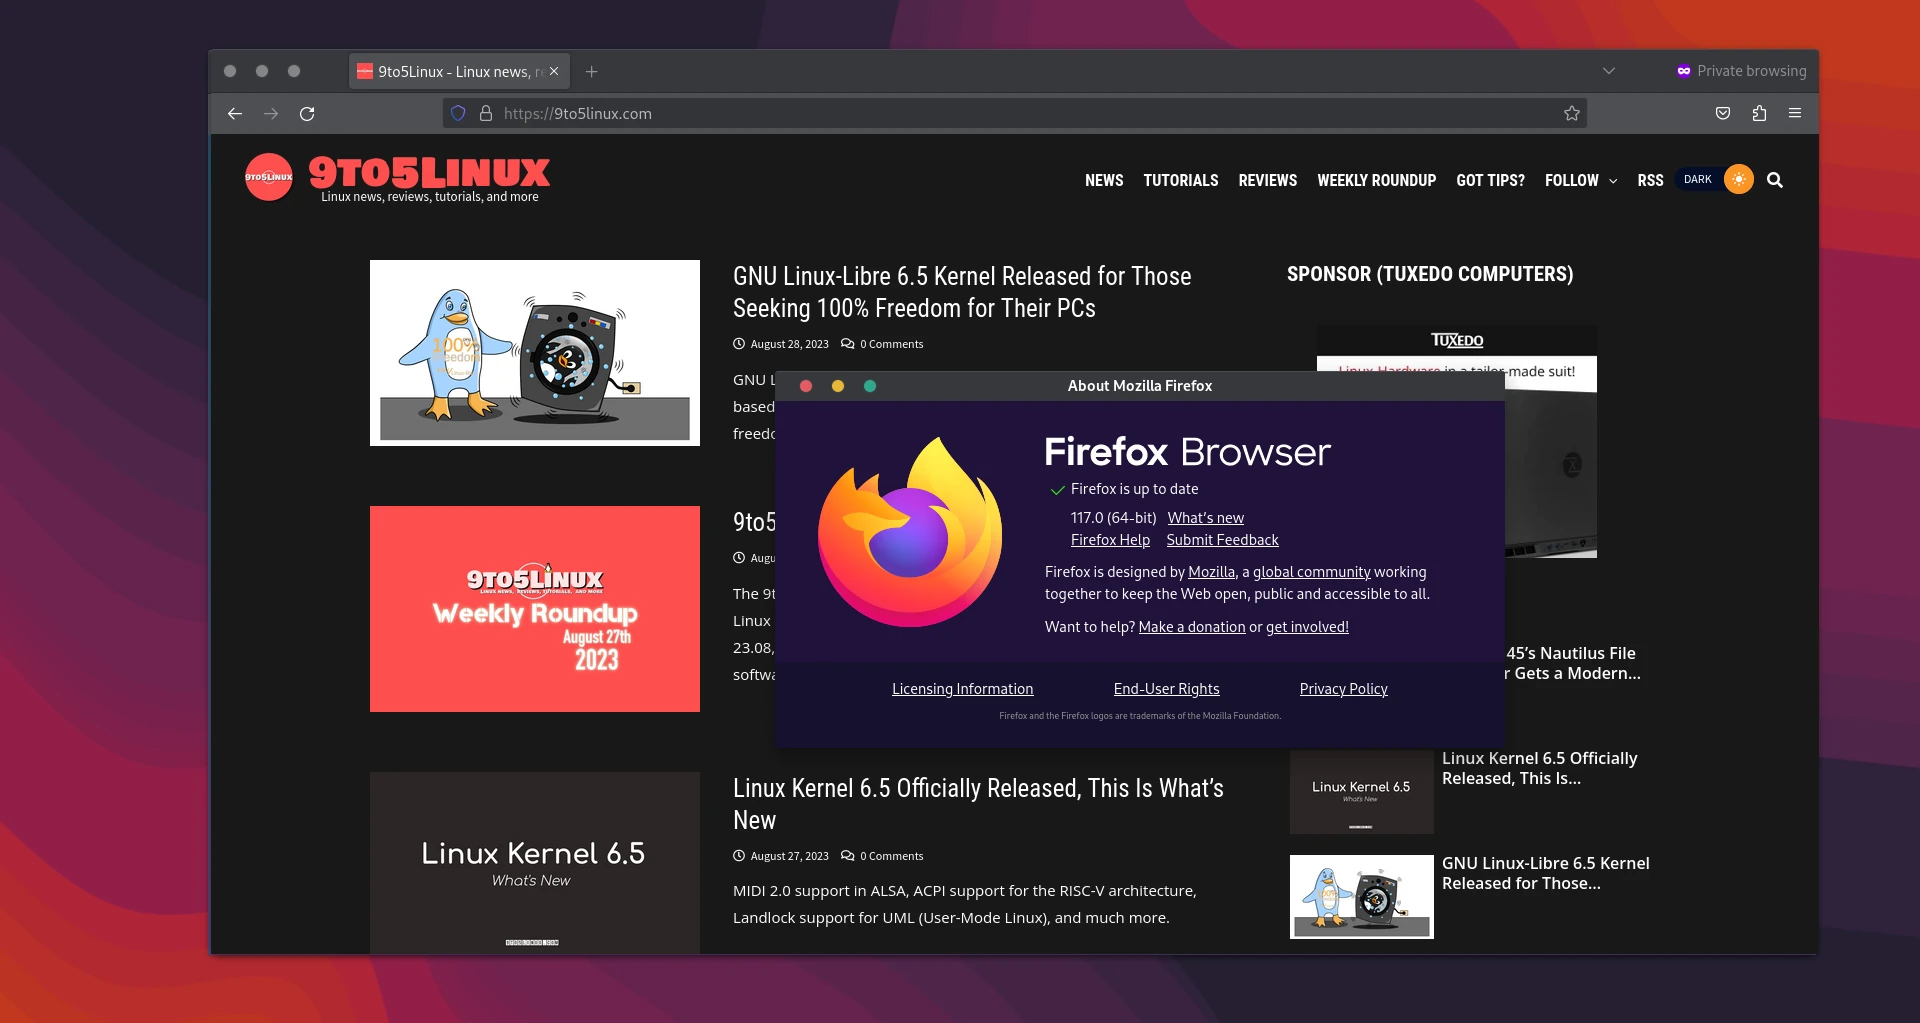 Mozilla Firefox 117 Is Now Available for Download, Here’s What’s New